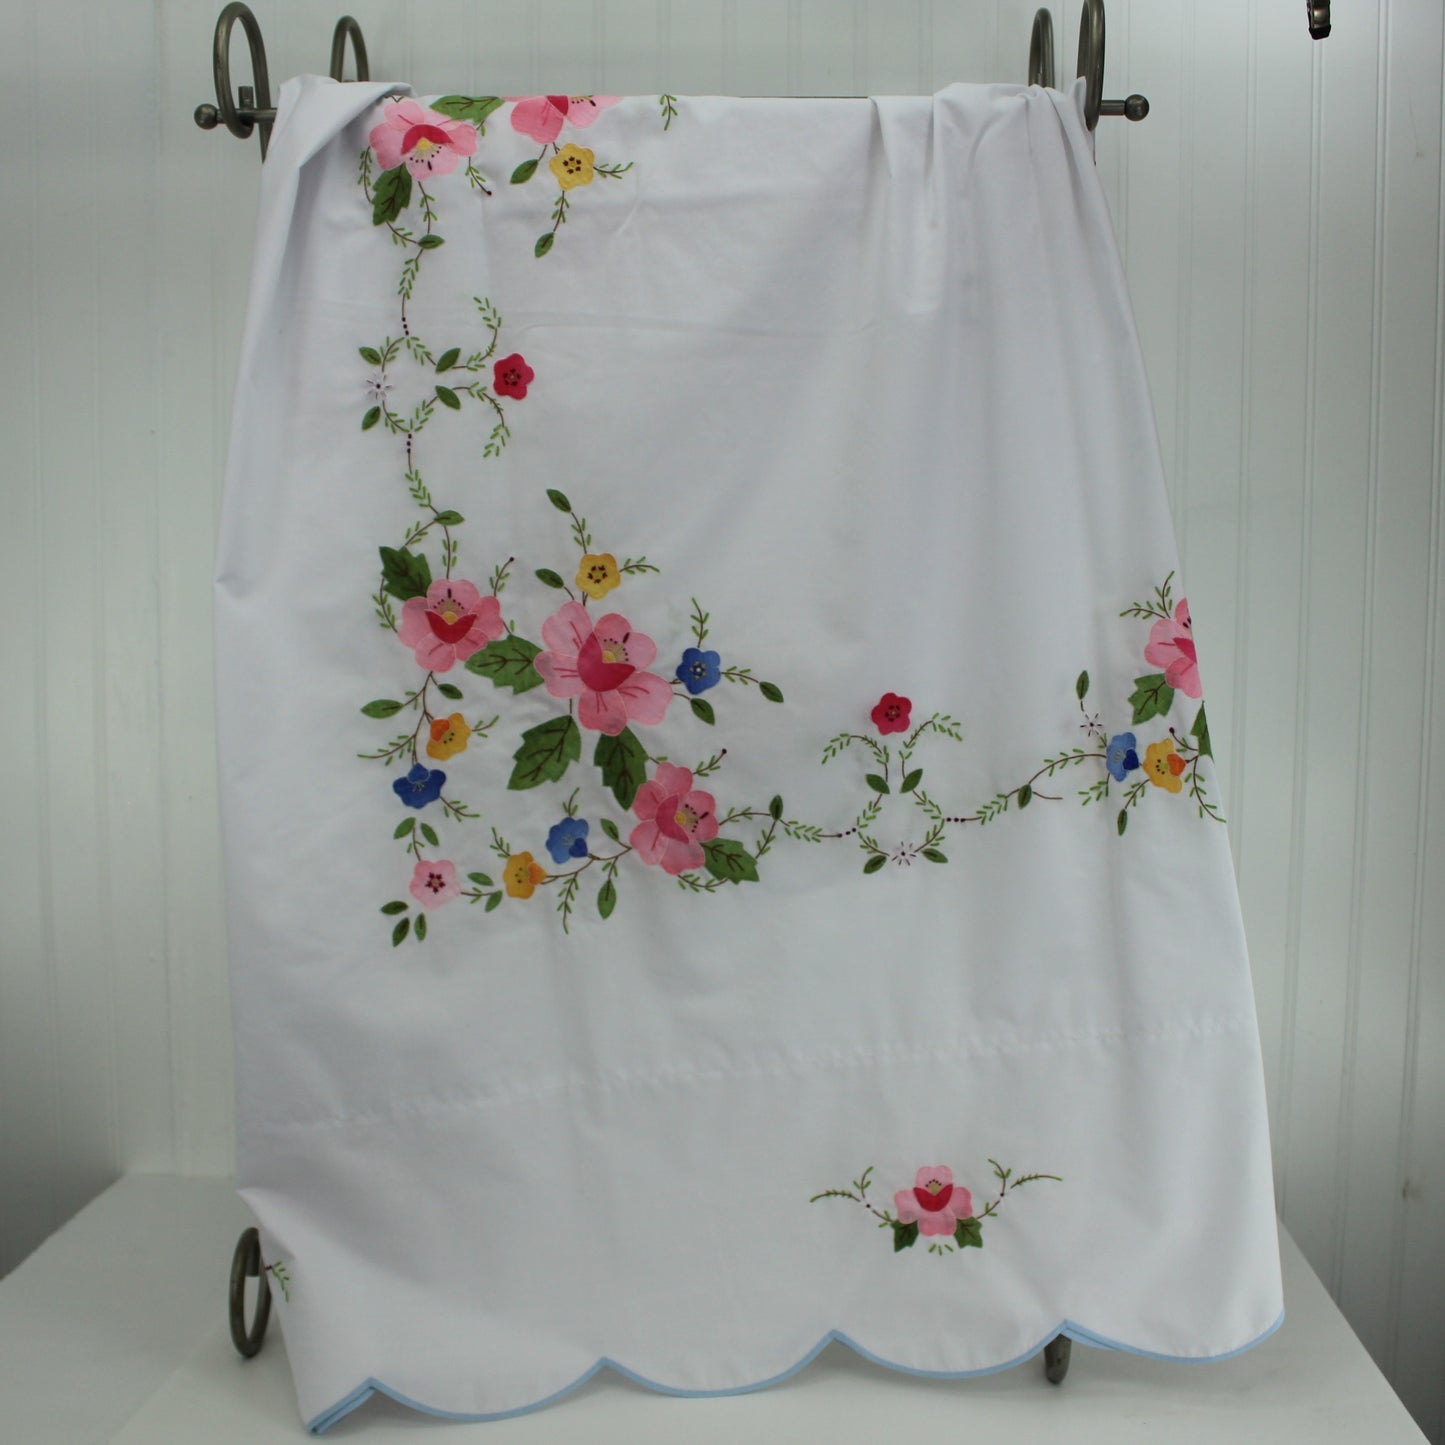 White Cotton Tablecloth Flower Applique Embroidery Blue Scallop Border 67" X 50" flowers pink blue